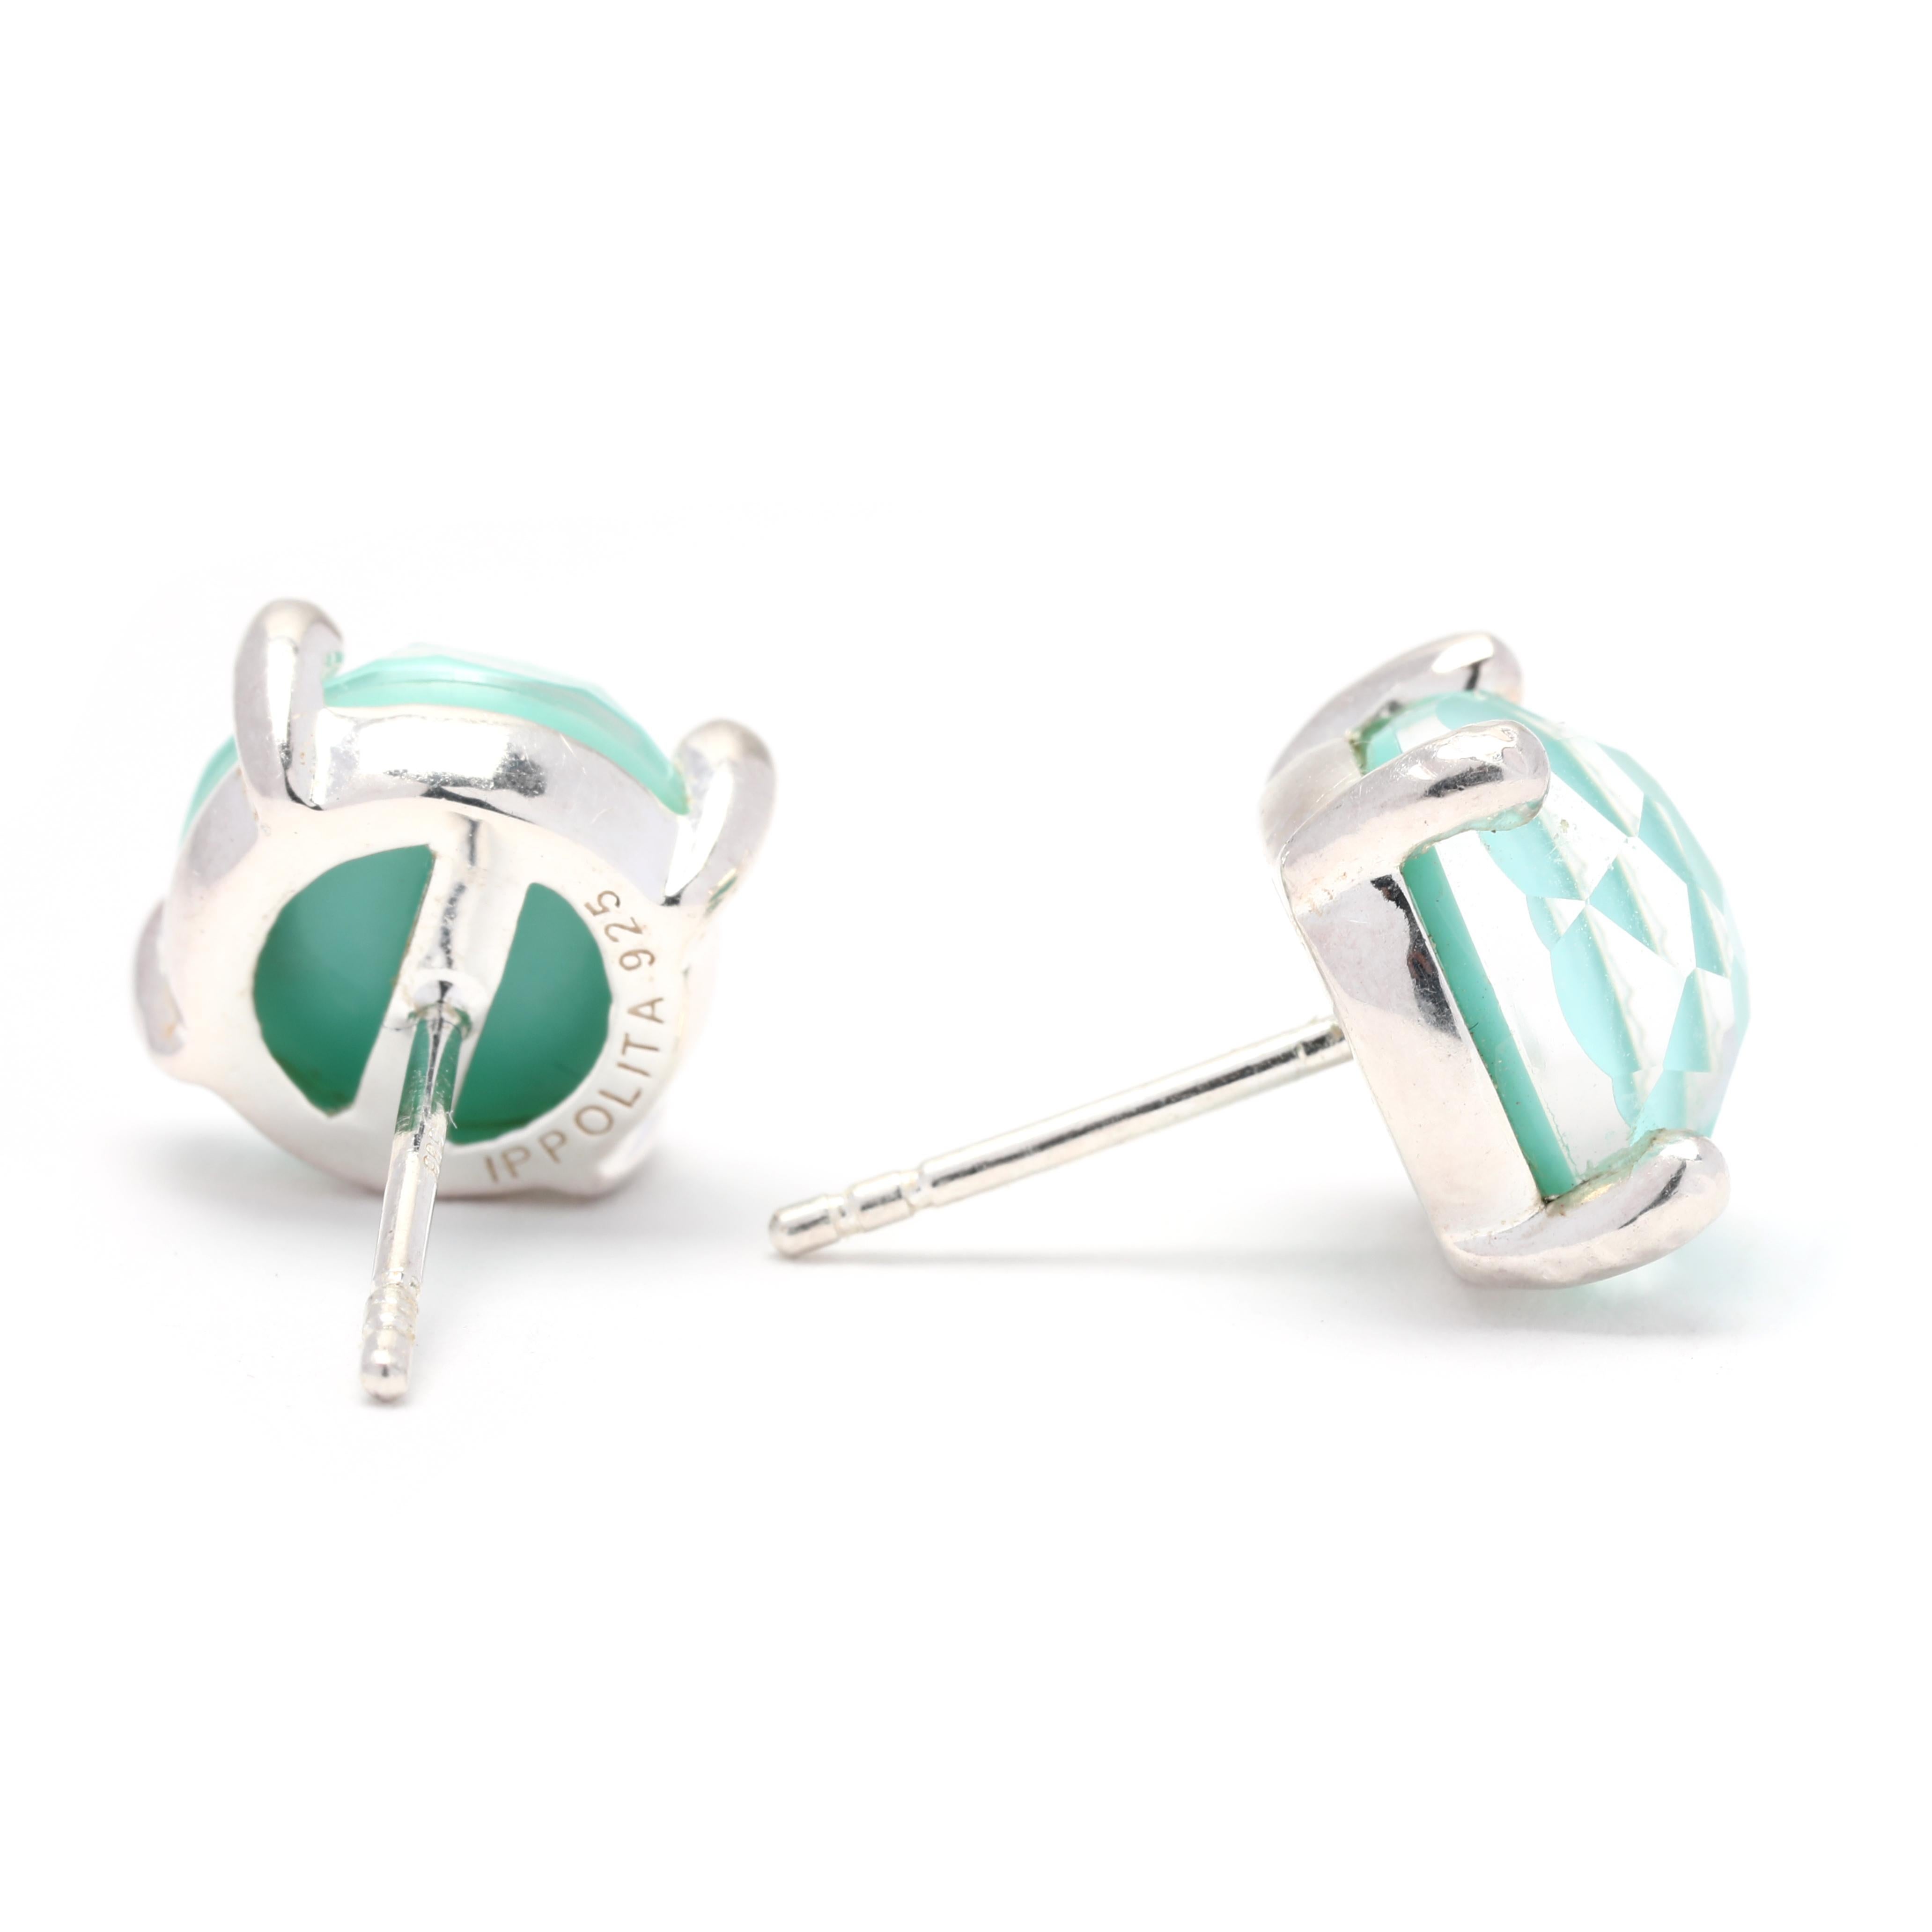 These Ippolita Rock Candy Turquoise Clear Quartz Stud Earrings are a stunning addition to any jewelry collection. Made from sterling silver, these earrings feature a large turquoise stone with a clear quartz overlay, creating a unique and